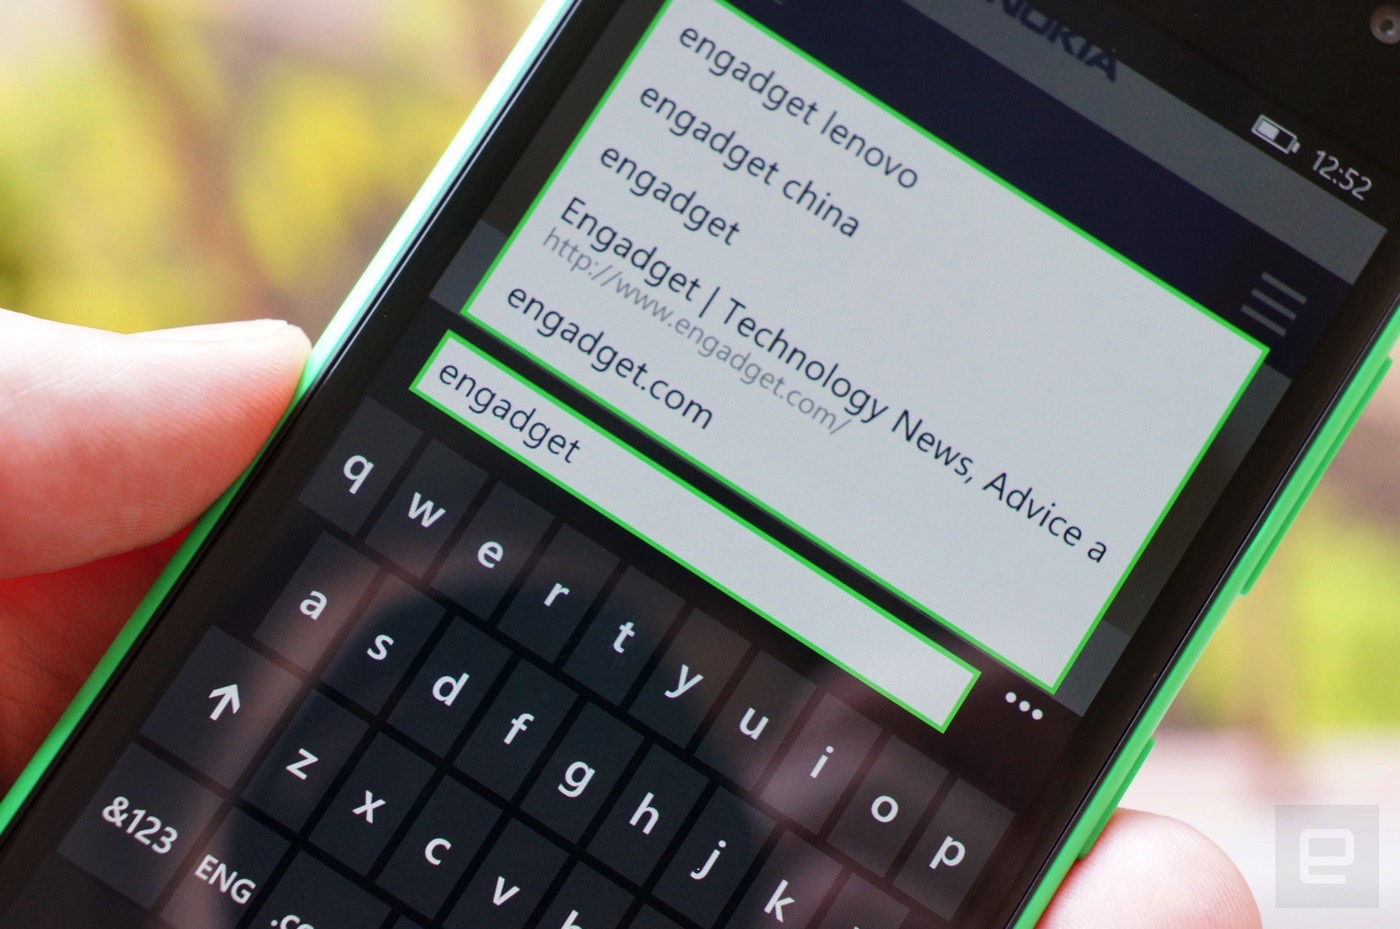 Microsoft&#039;s iPhone keyboard has a one-handed mode